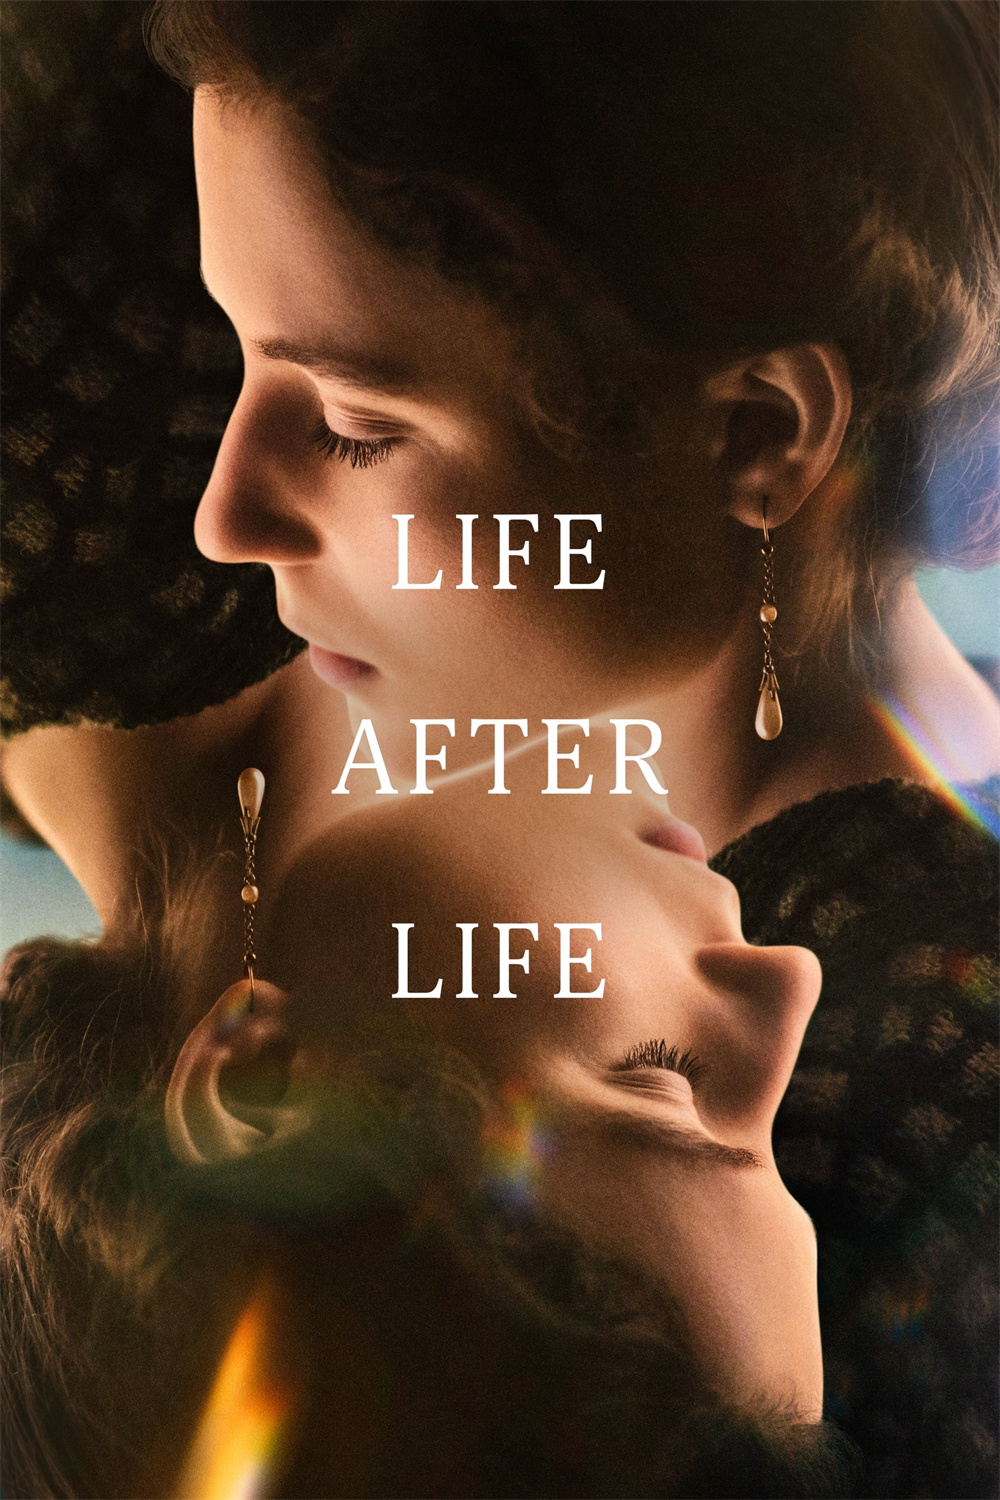 "Life Never Ends" poster